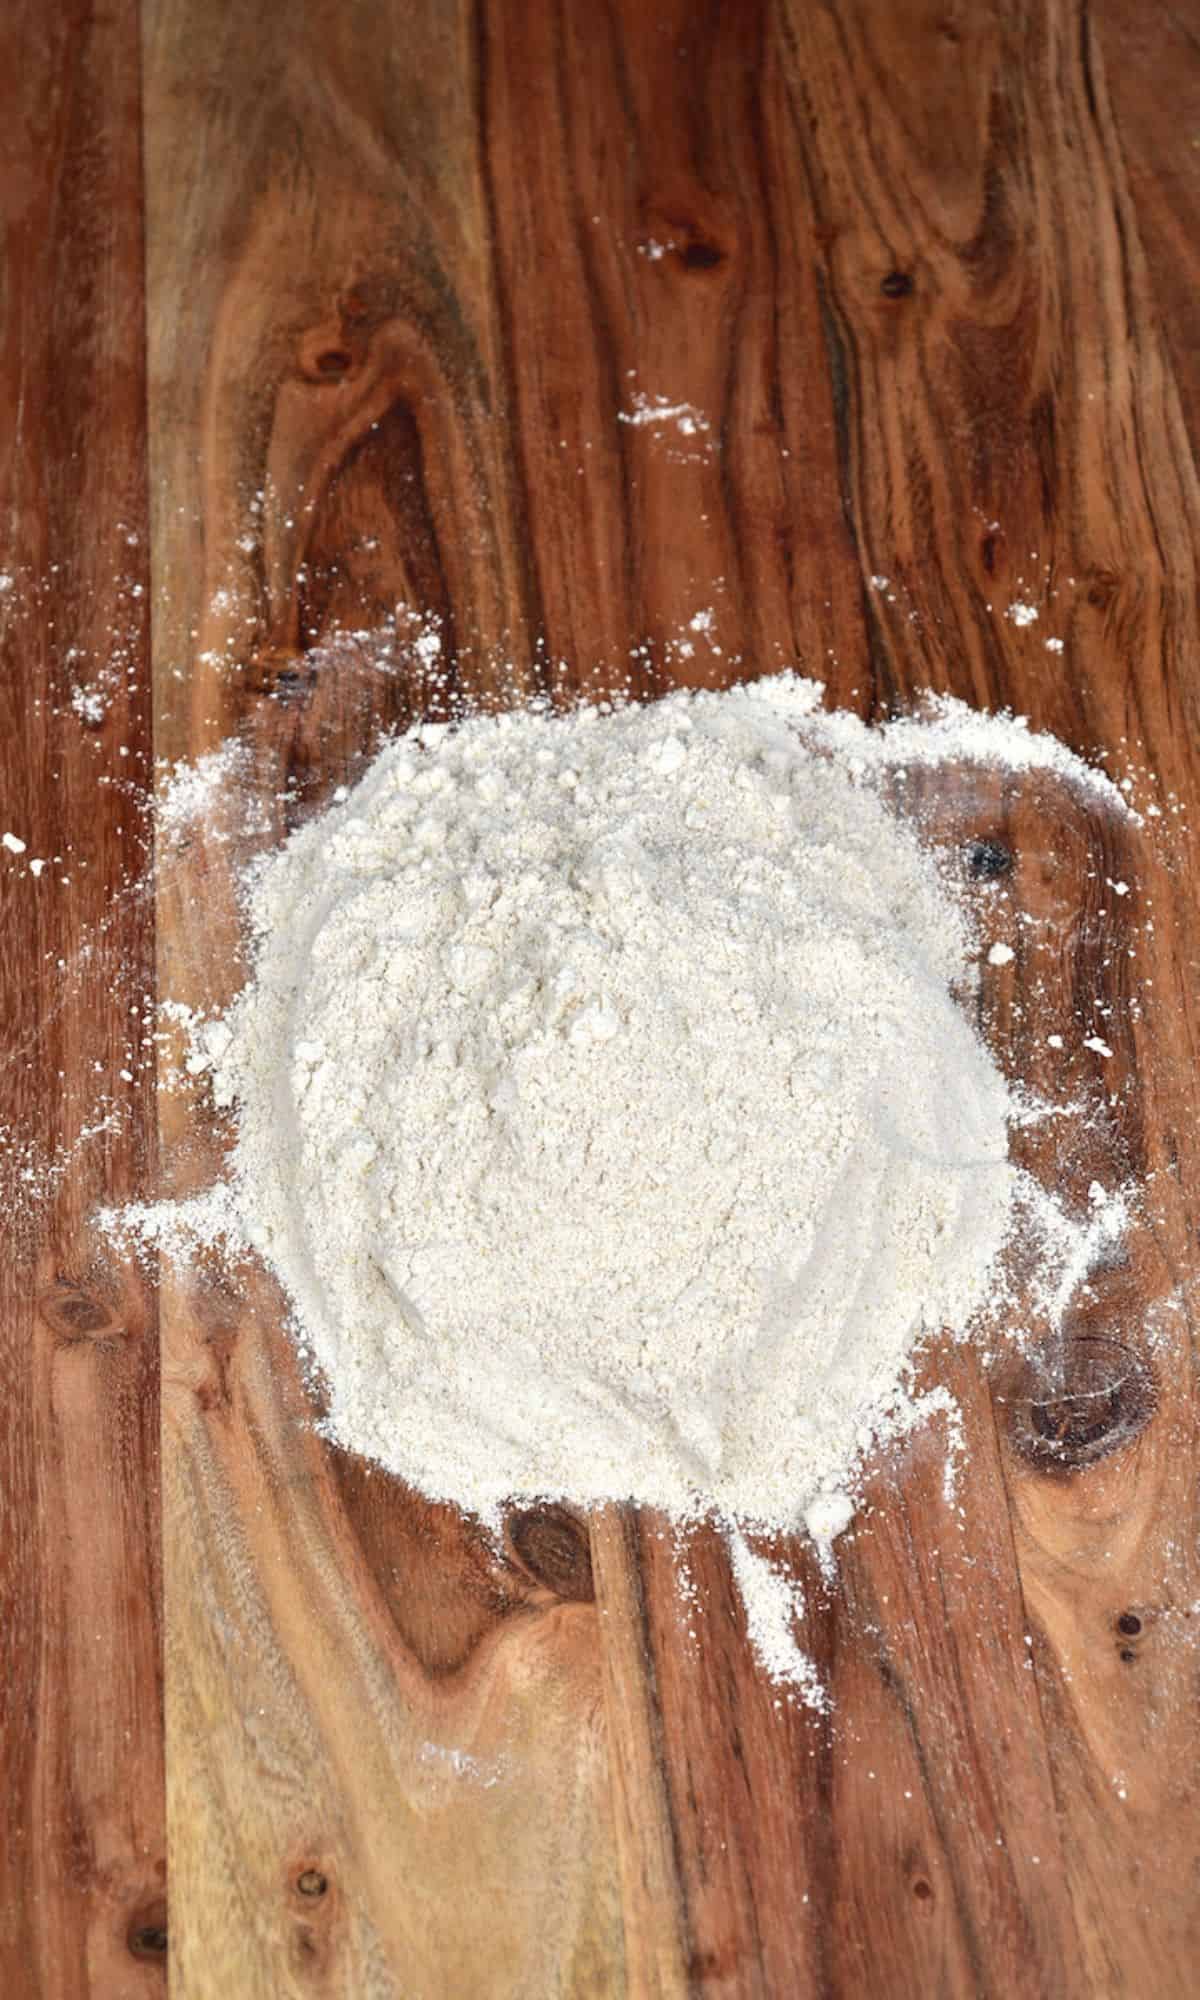 Oat flour on a wooden surface